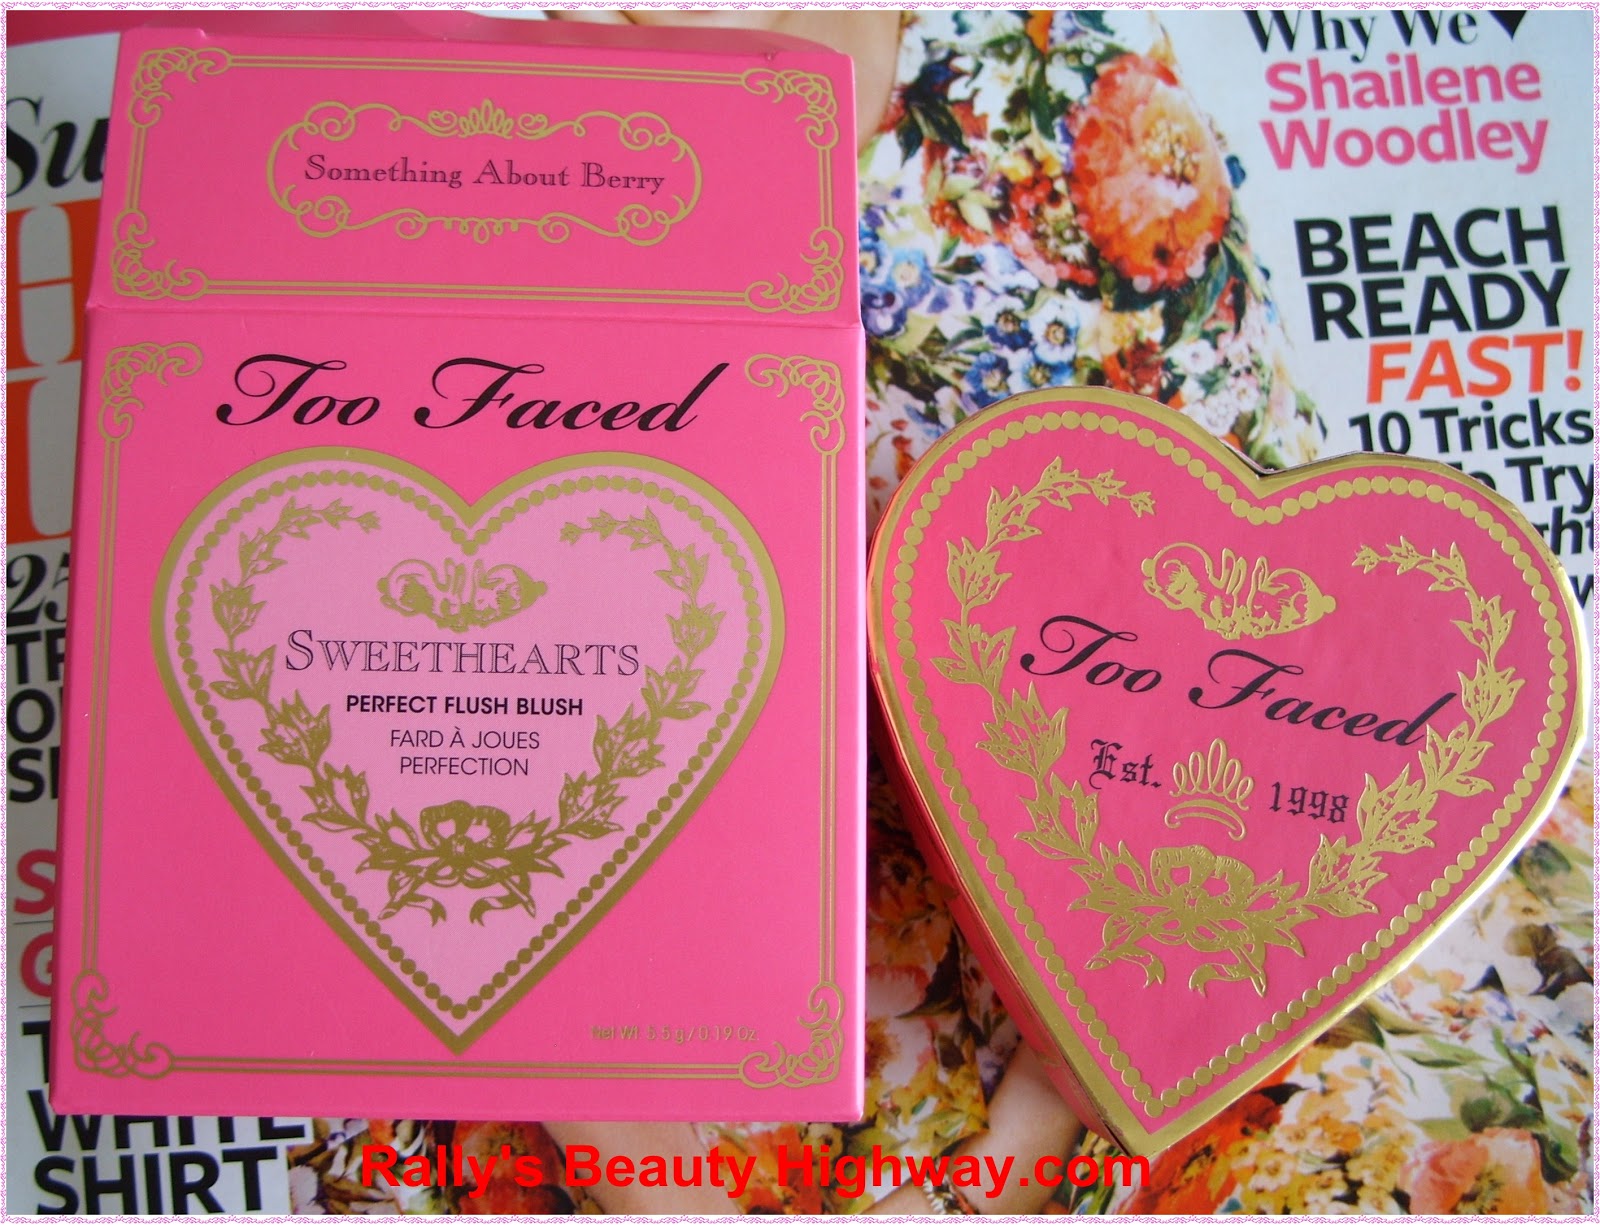 Too Faced, Blush